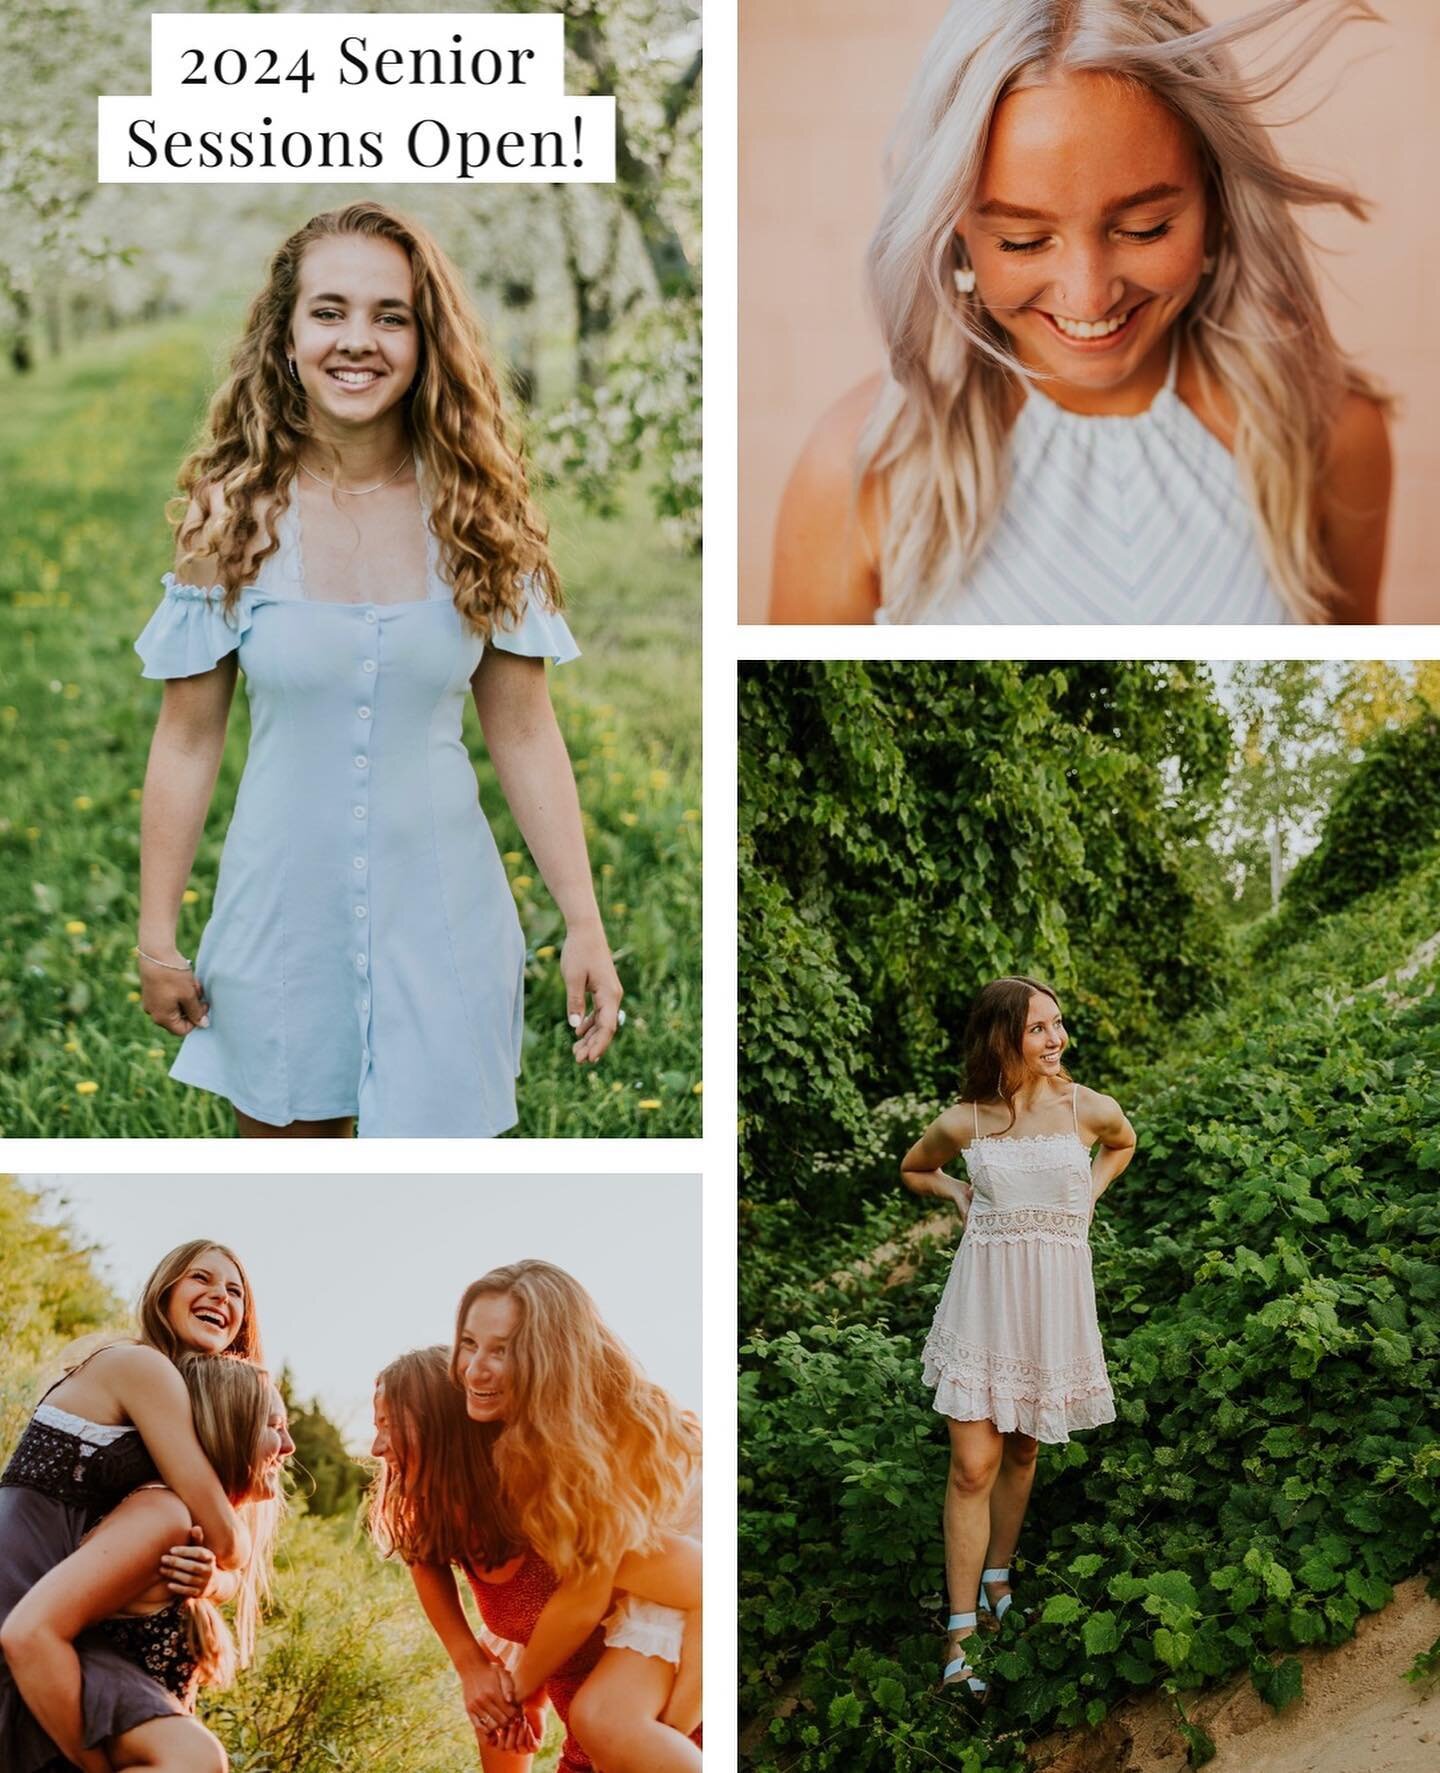 Calling all 2024 high school seniors in the Traverse City area! It&rsquo;s grad photo season!! I will be in Traverse City from May 8 - May 25. Take advantage of the blossoms in season and book a May session with me now via the contact page on my webs